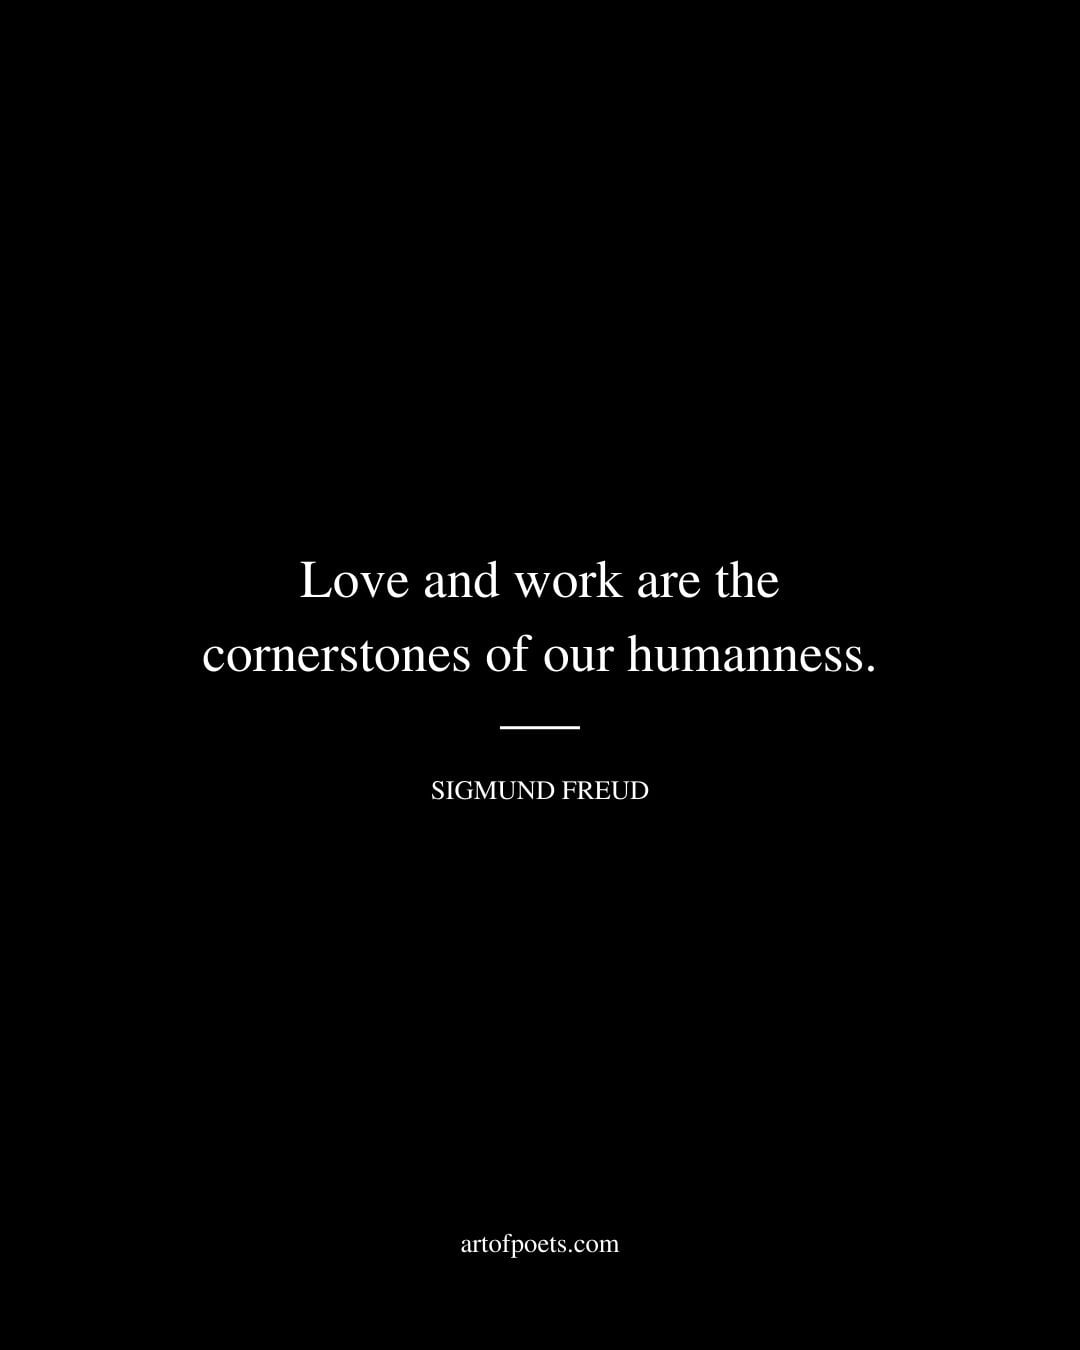 Love and work are the cornerstones of our humanness. Sigmund Freud